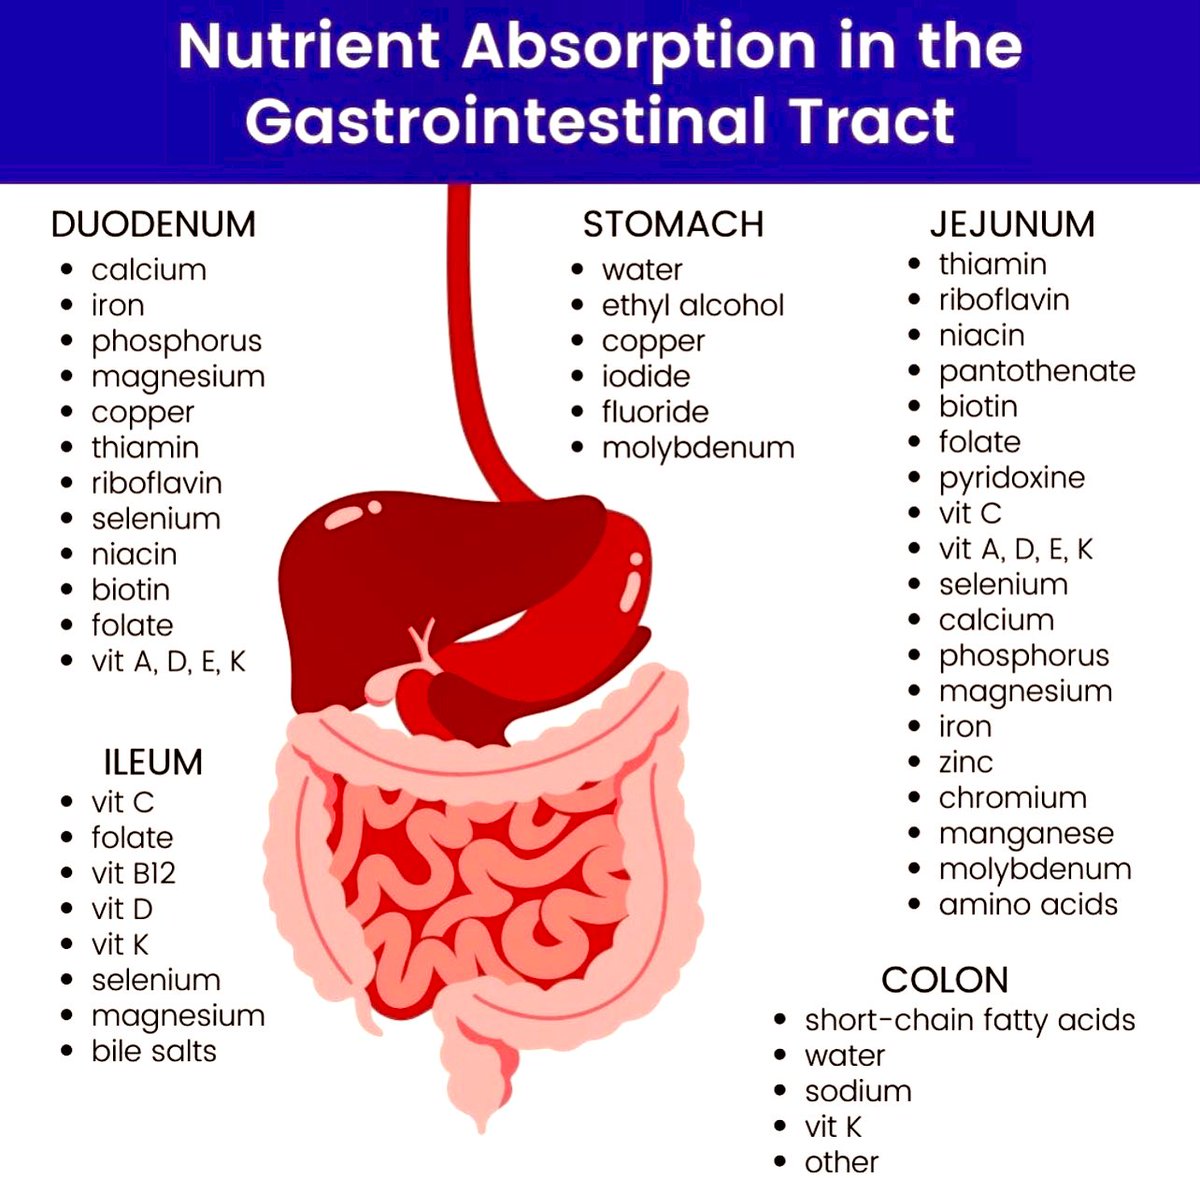 🙋‍♂️ Nutrient absorption in the GI Tract #MedEd #Nutrition #FOAMed #TipsForNewDocs #medicalstudents #nutritionmatters #GITwitter #NutritionisaScience #MedTwitter